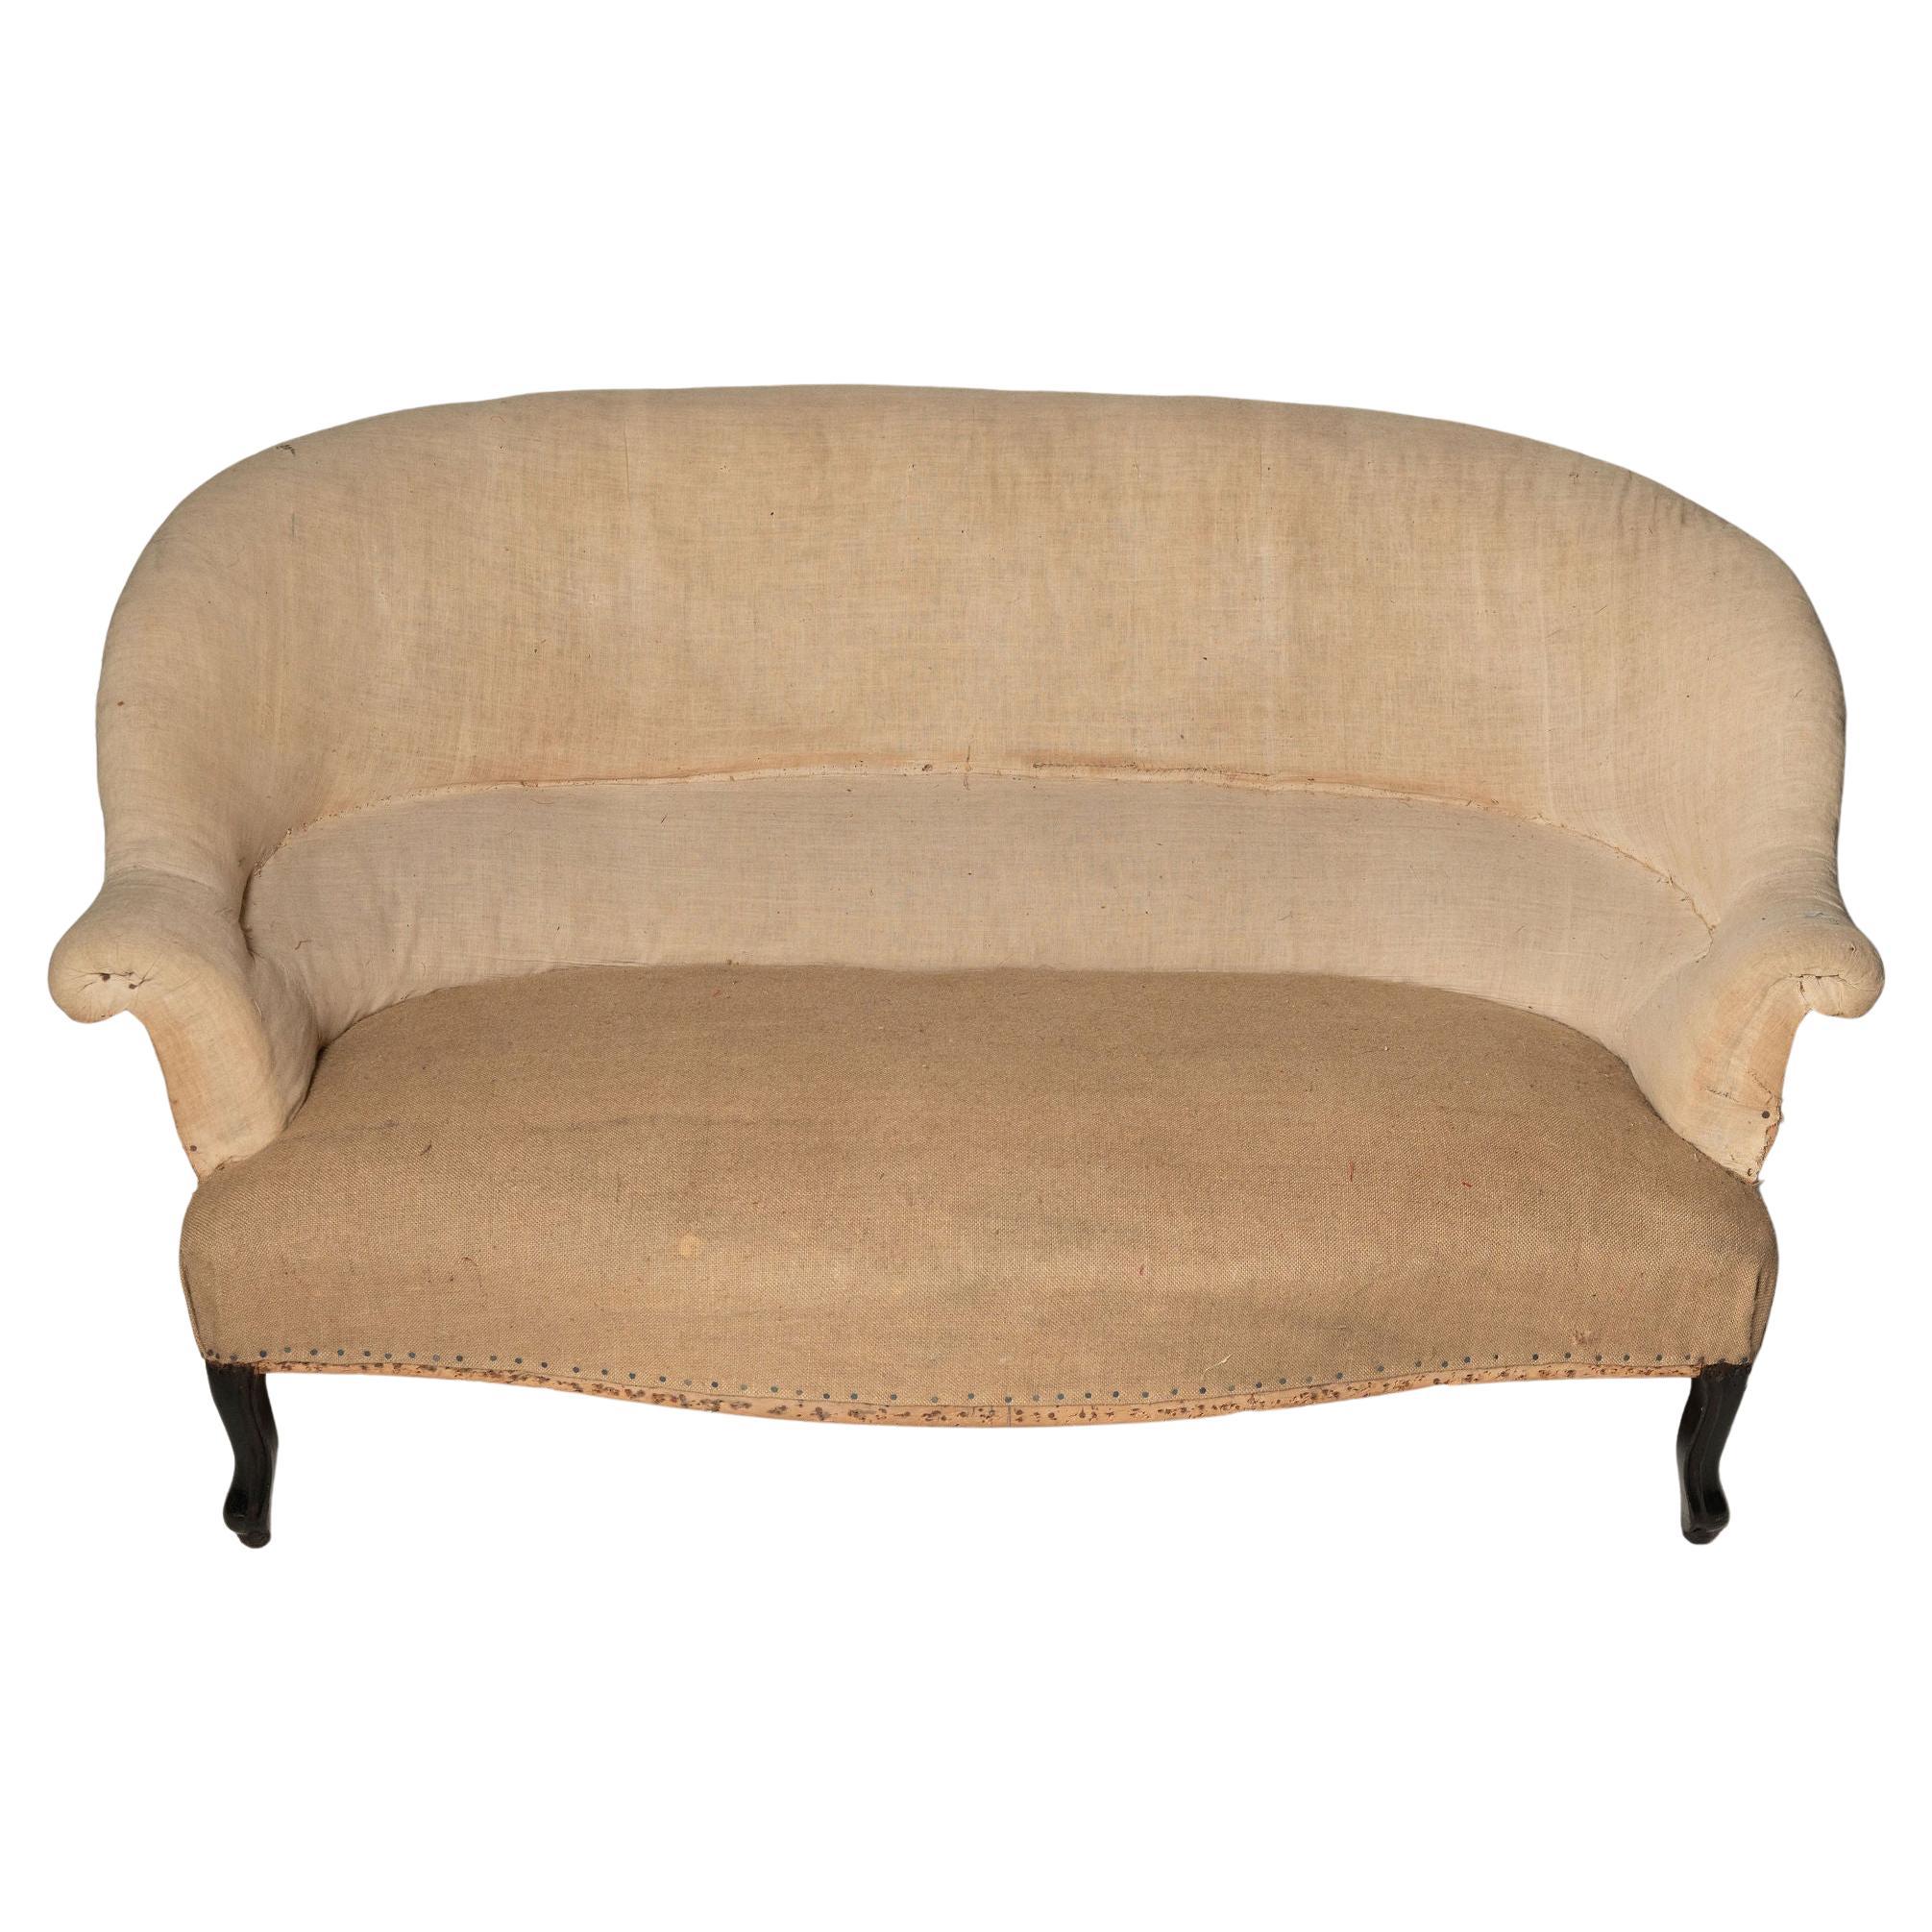 Antique French sofa for upholstery 